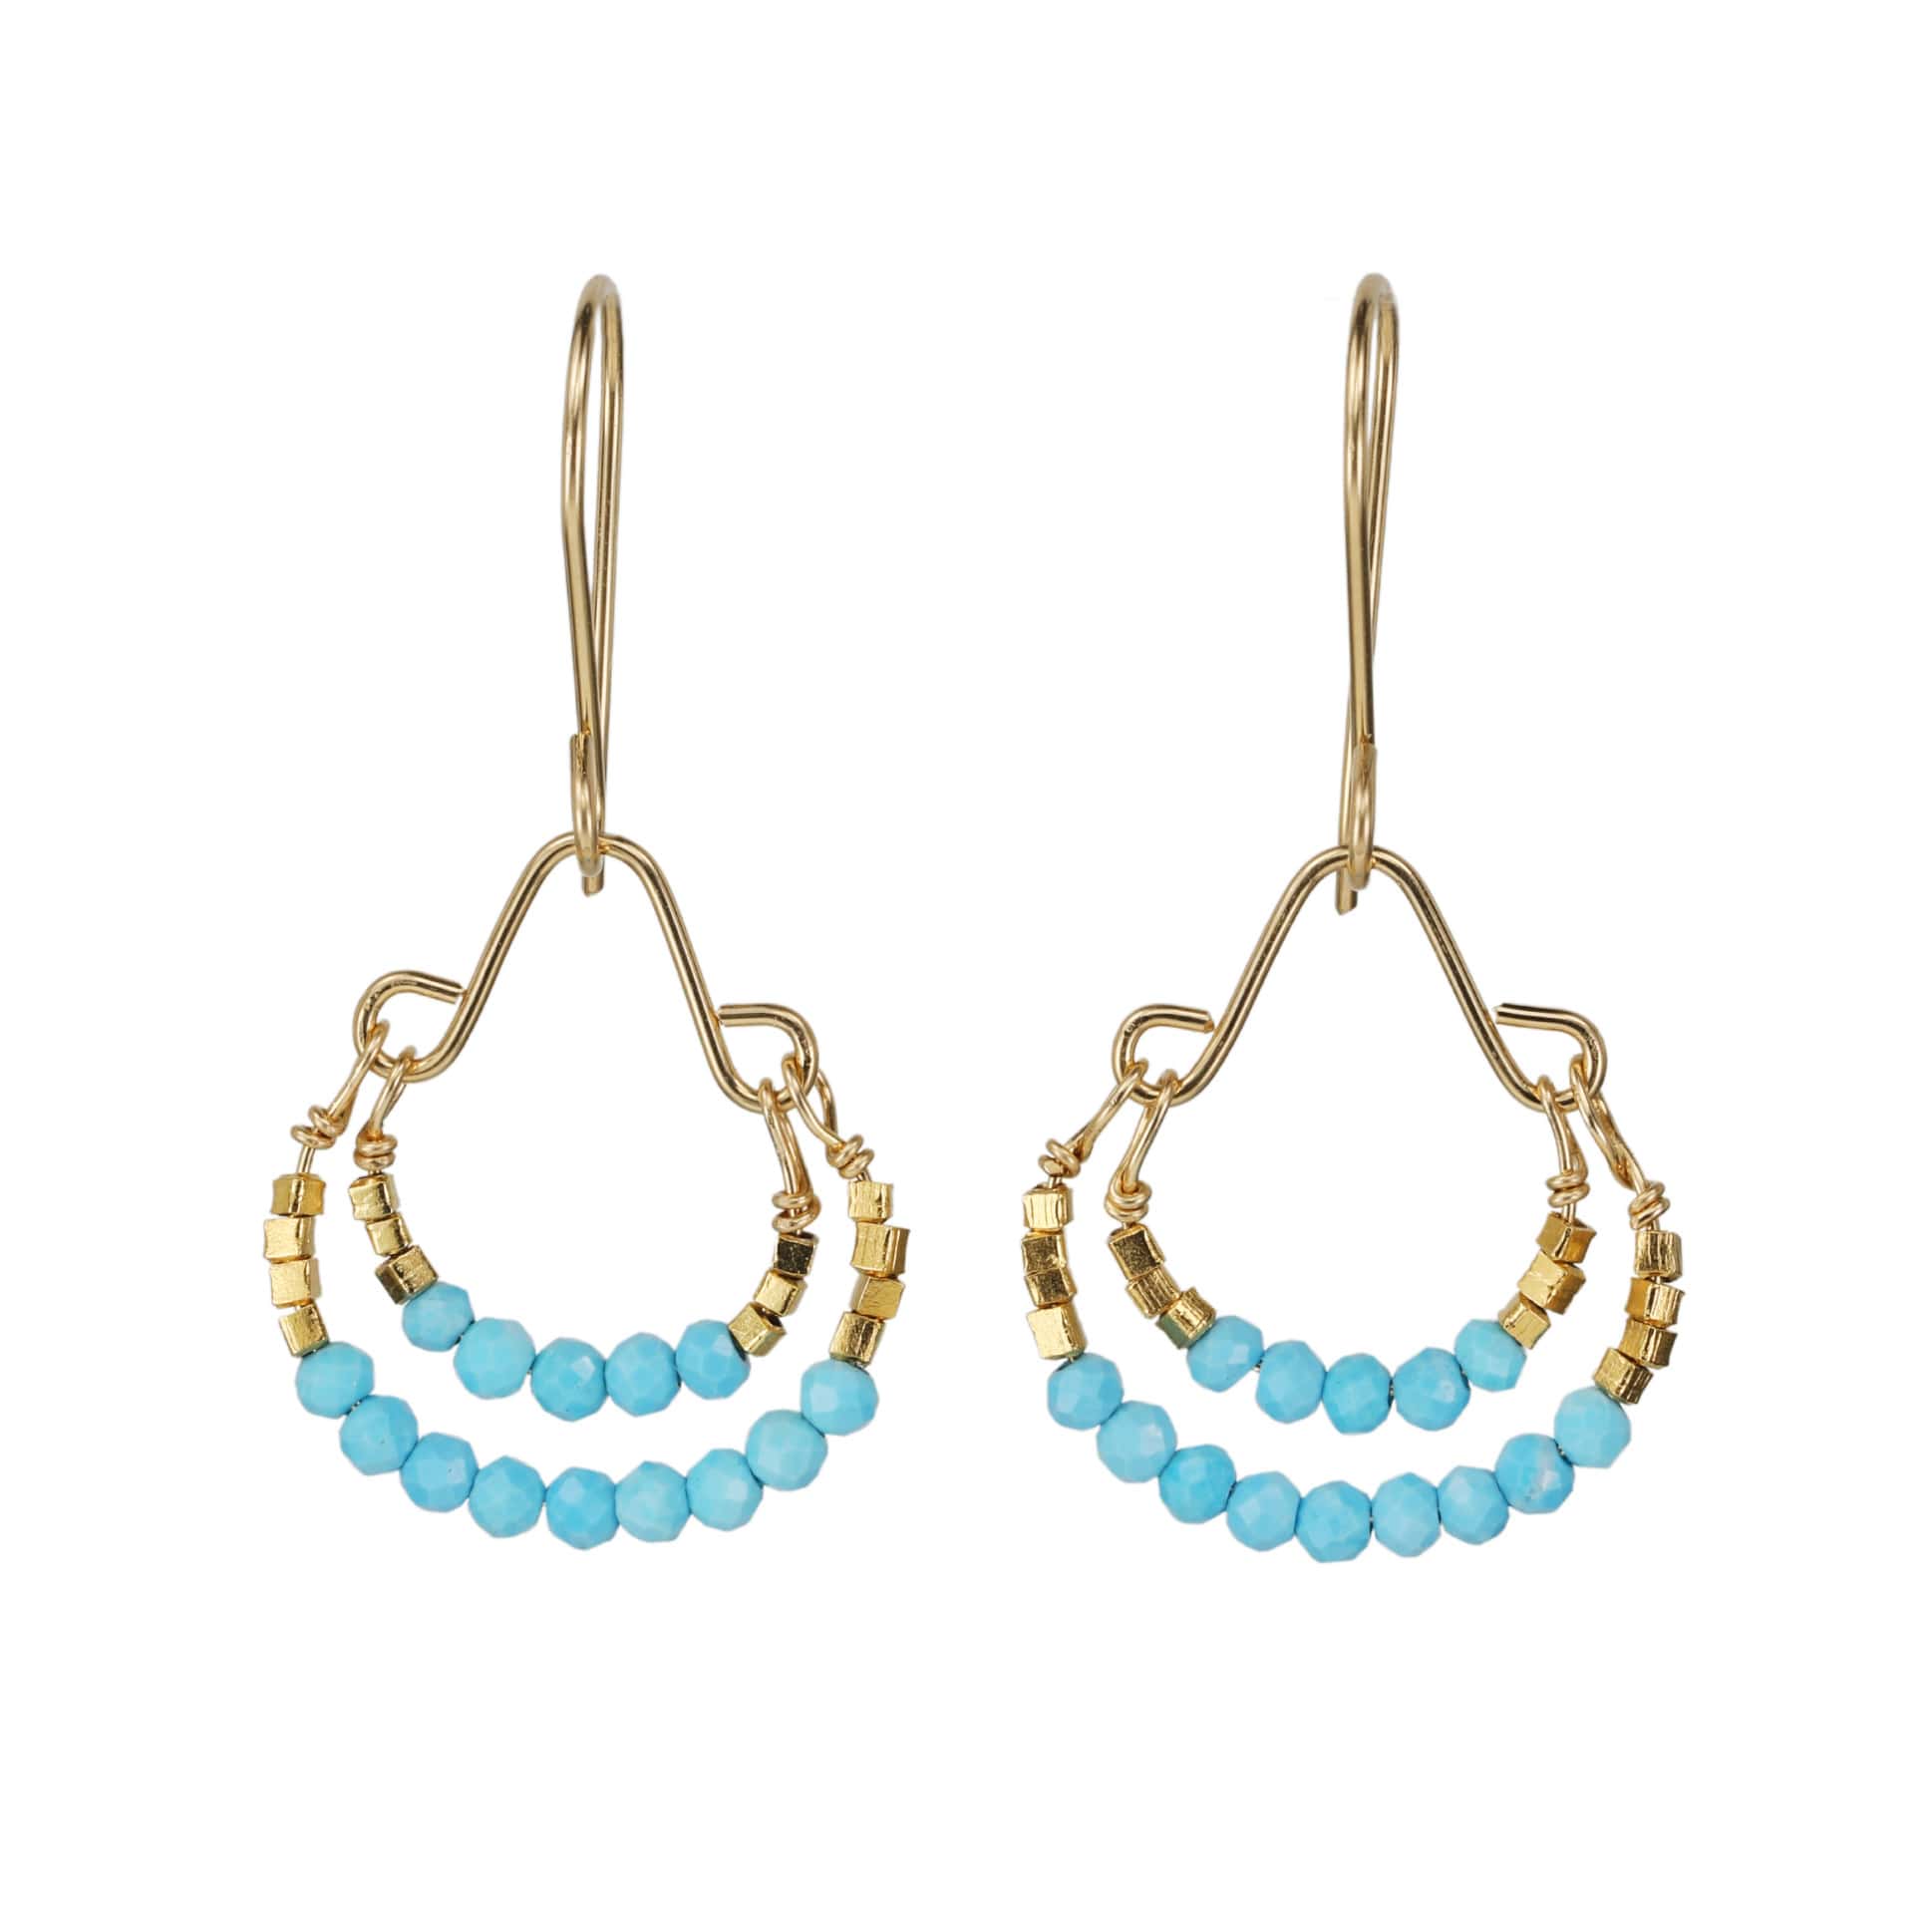 Debbie Fisher Gold Vermeil and Turquoise Double Hoop Earrings